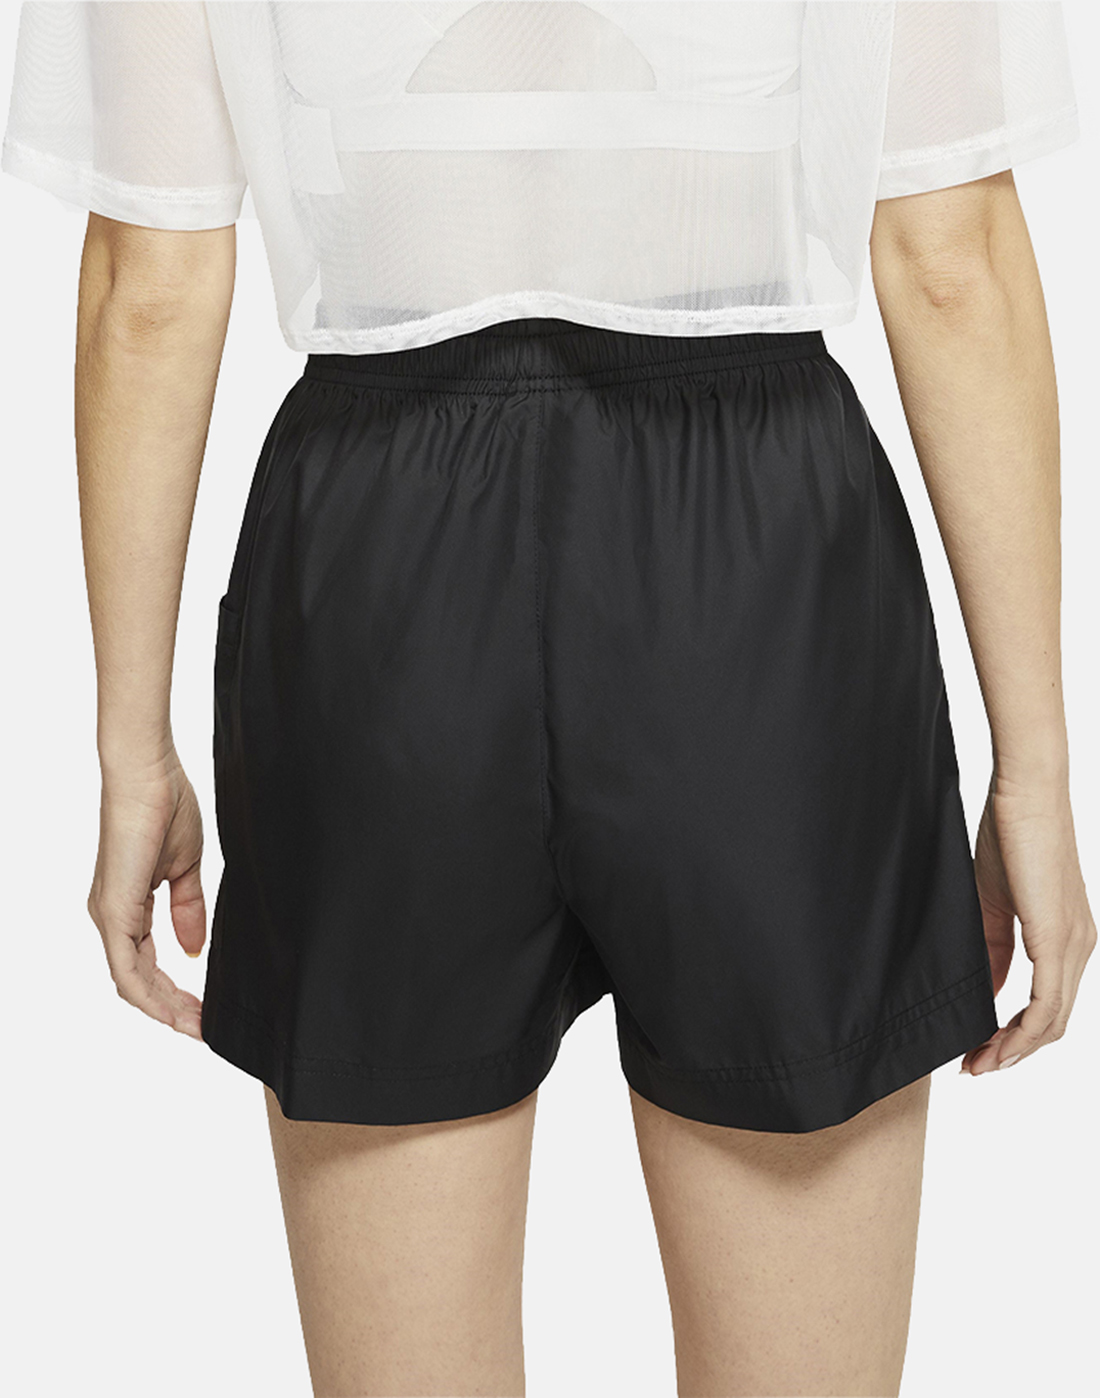 Nike Womens Essential Woven Shorts - Black | Life Style Sports IE